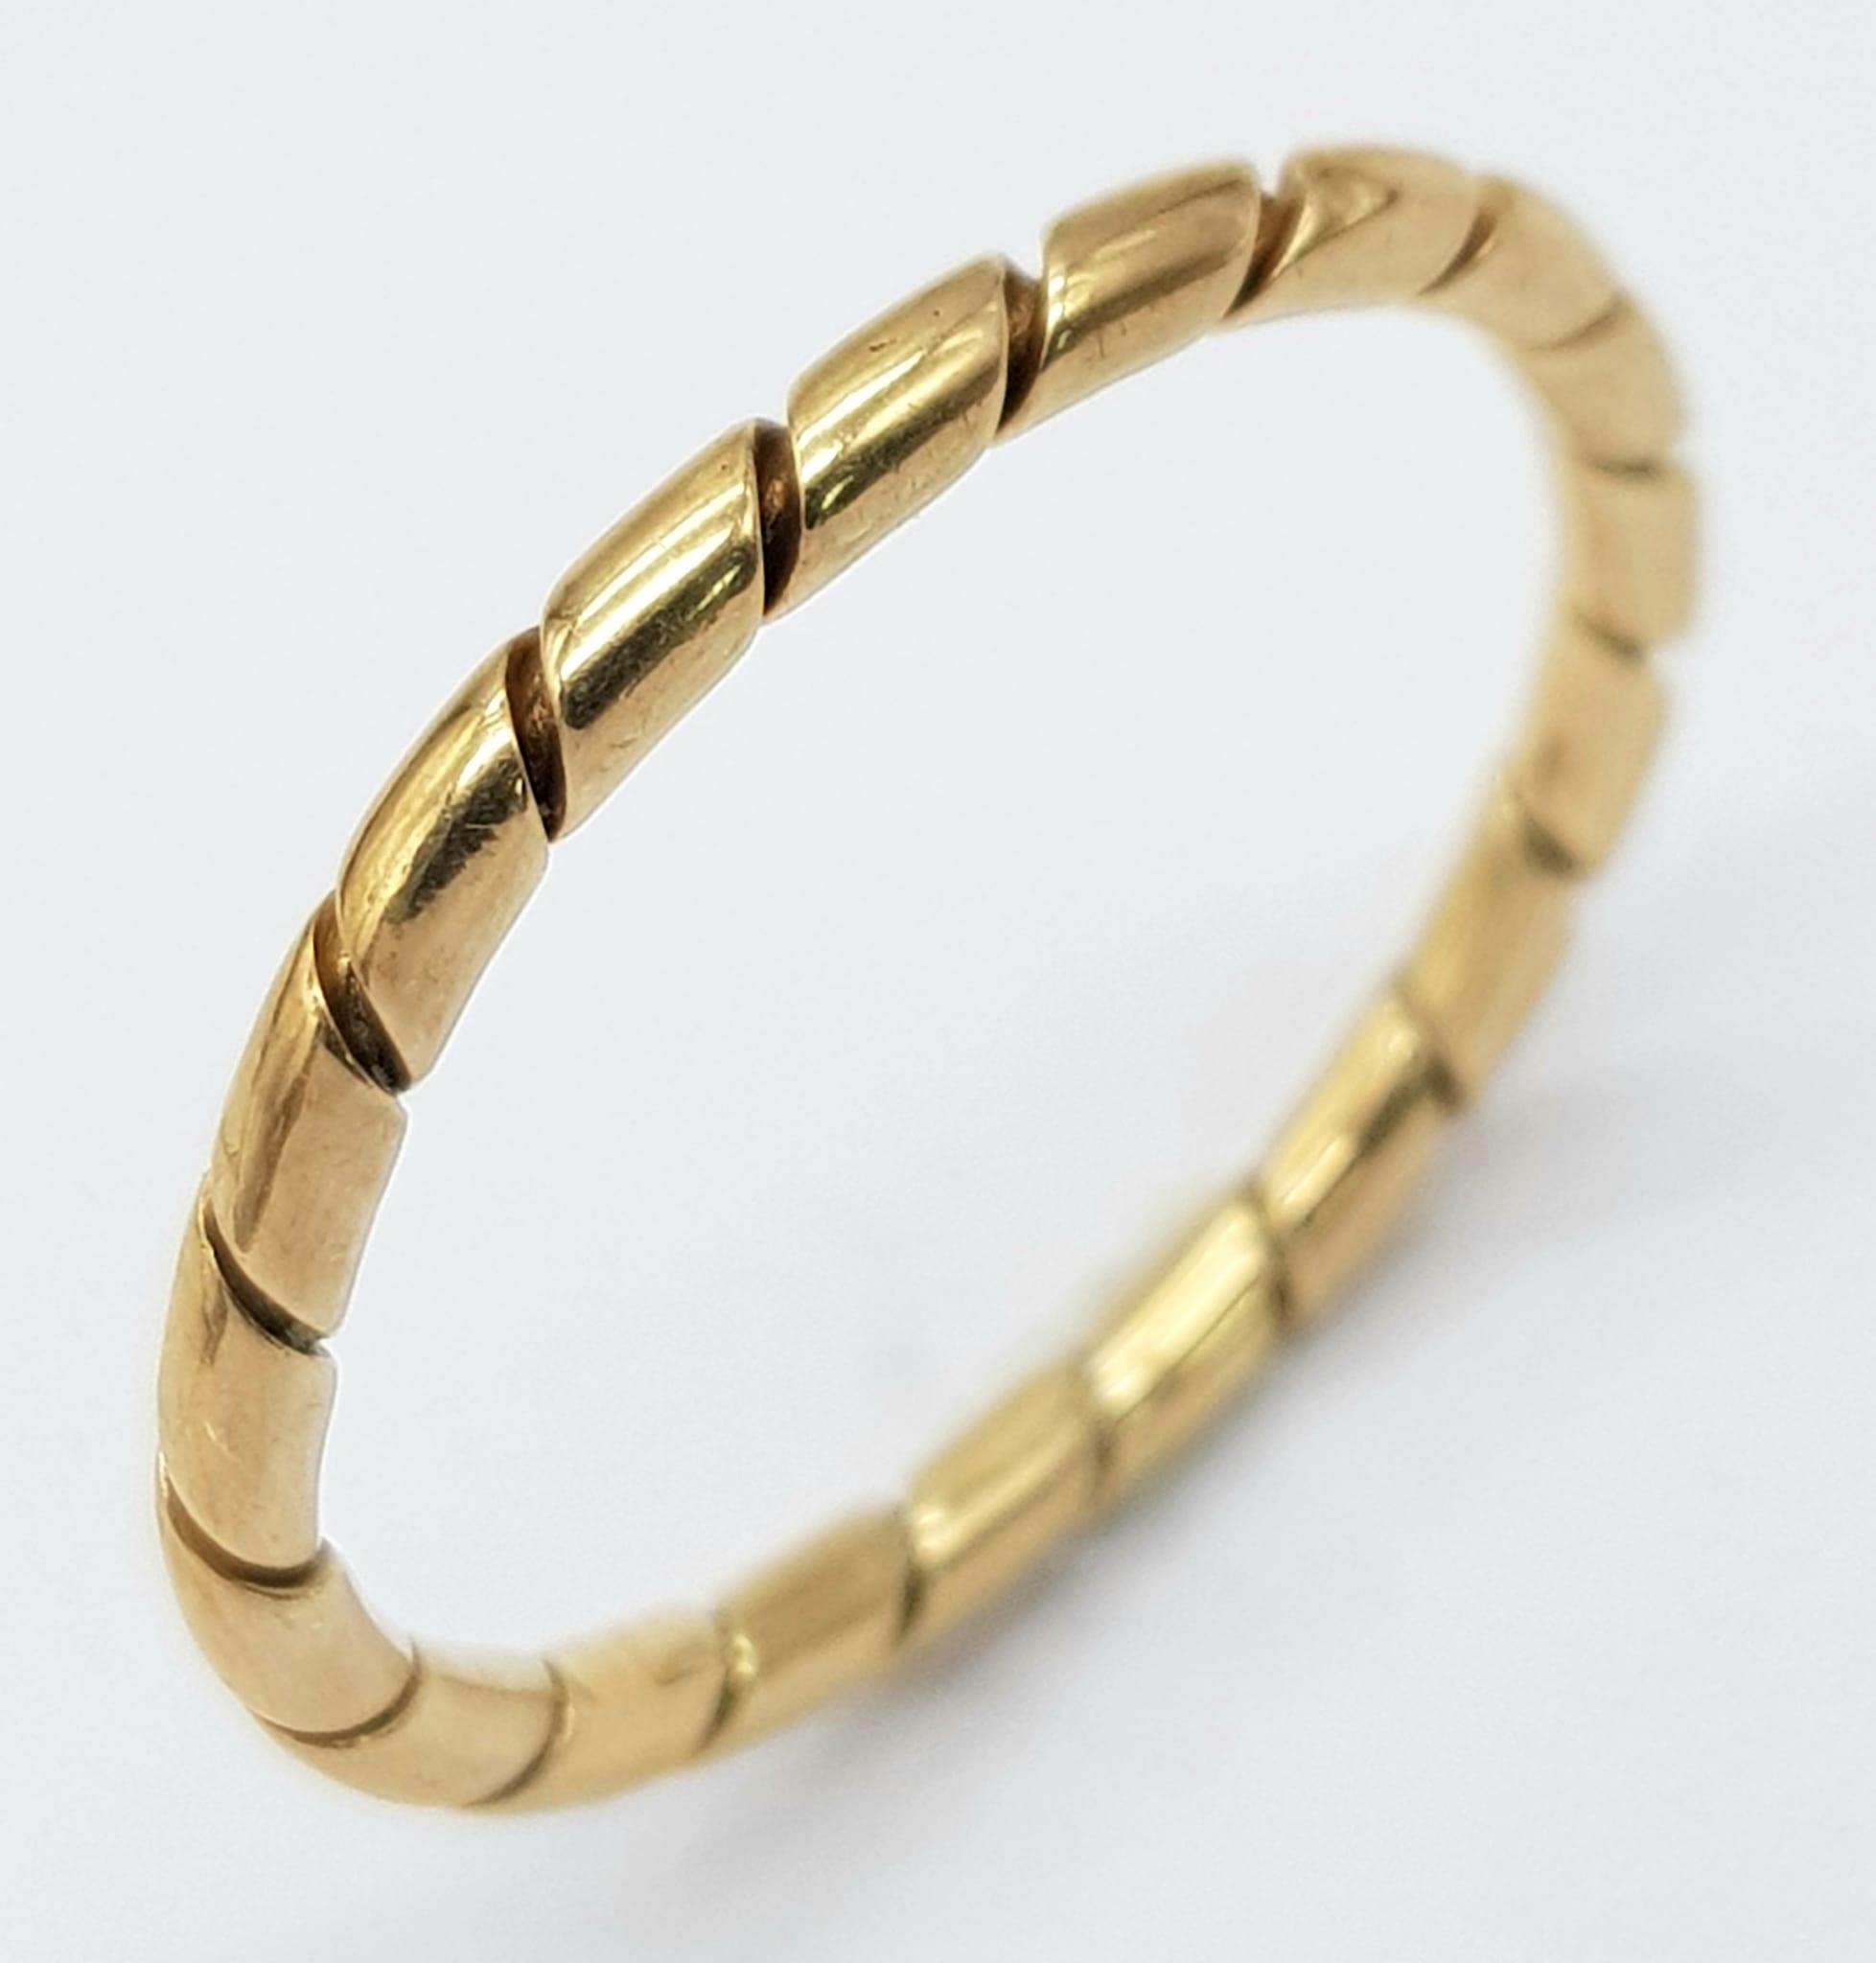 A Vintage 9K Yellow Gold Thin Band Ring with Diagonal Ridged Design. Size K. 1.33g. 2mm